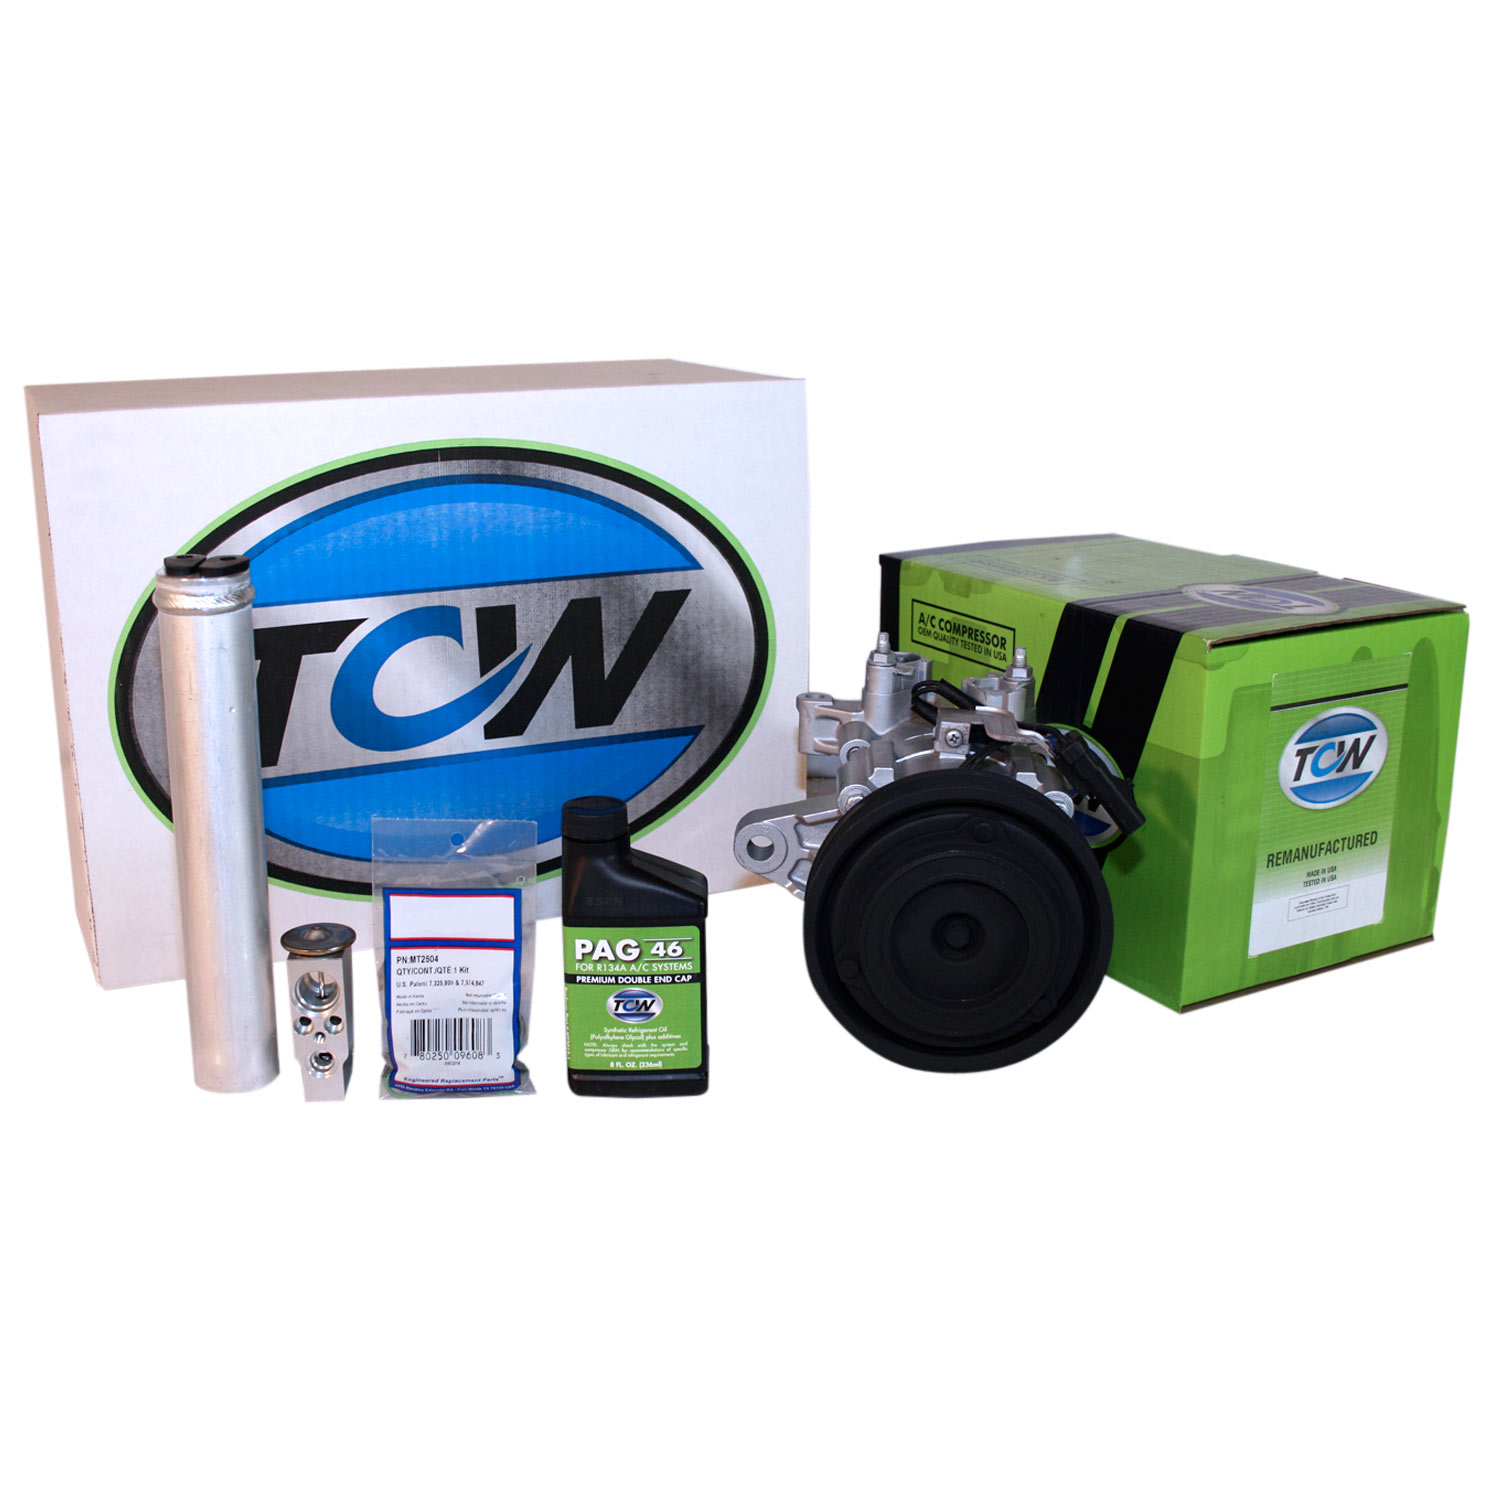 TCW Vehicle A/C Kit K1000277R Remanufactured Product Image field_60b6a13a6e67c